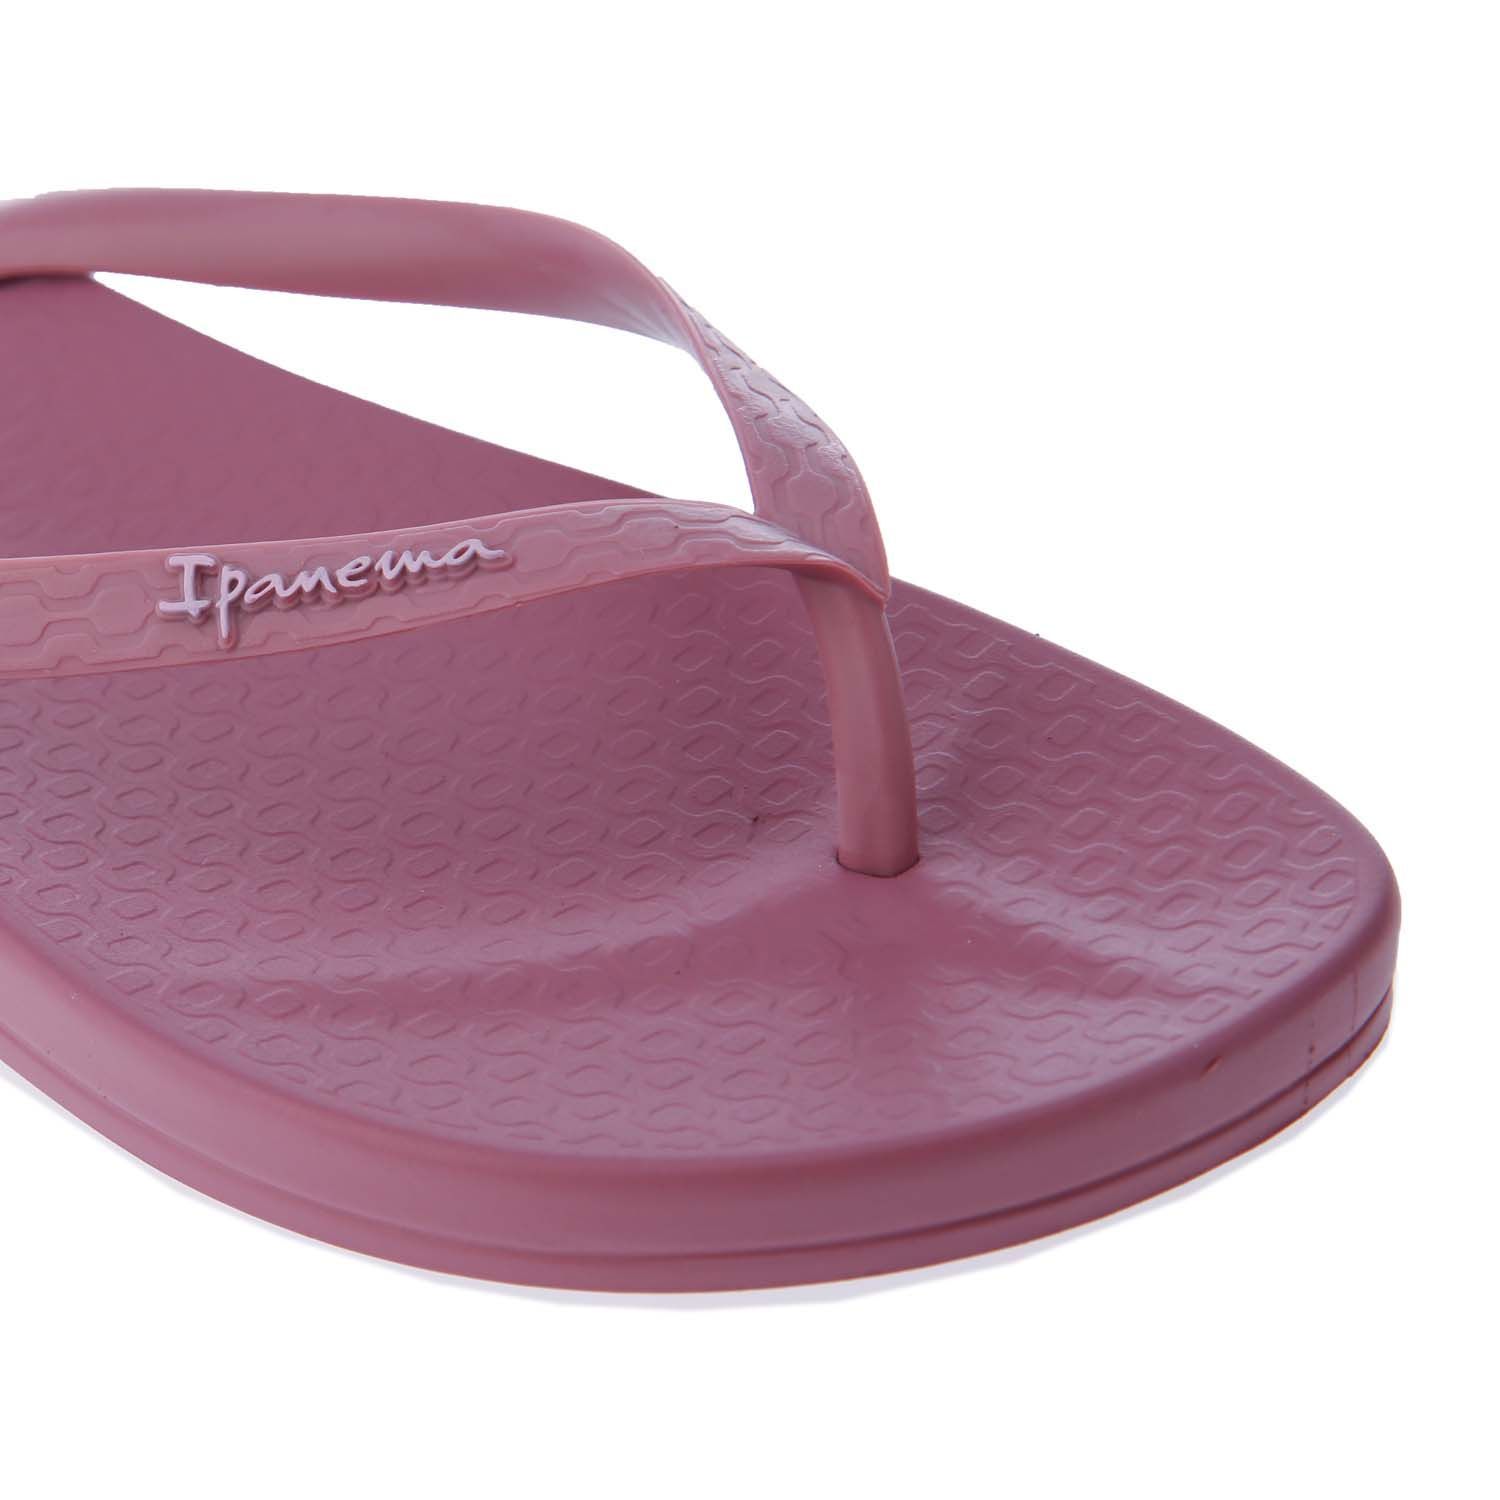 Womens Ipanema Anatomica Colours Flip Flops in berry.- Synthetic upper.- Slip-on design.- V-shaped straps.- Logo detail.- Toe post.- Anatomic footbed.  - Rubber sole.- Synthetic upper  lining and sole.- Ref: 8259122651